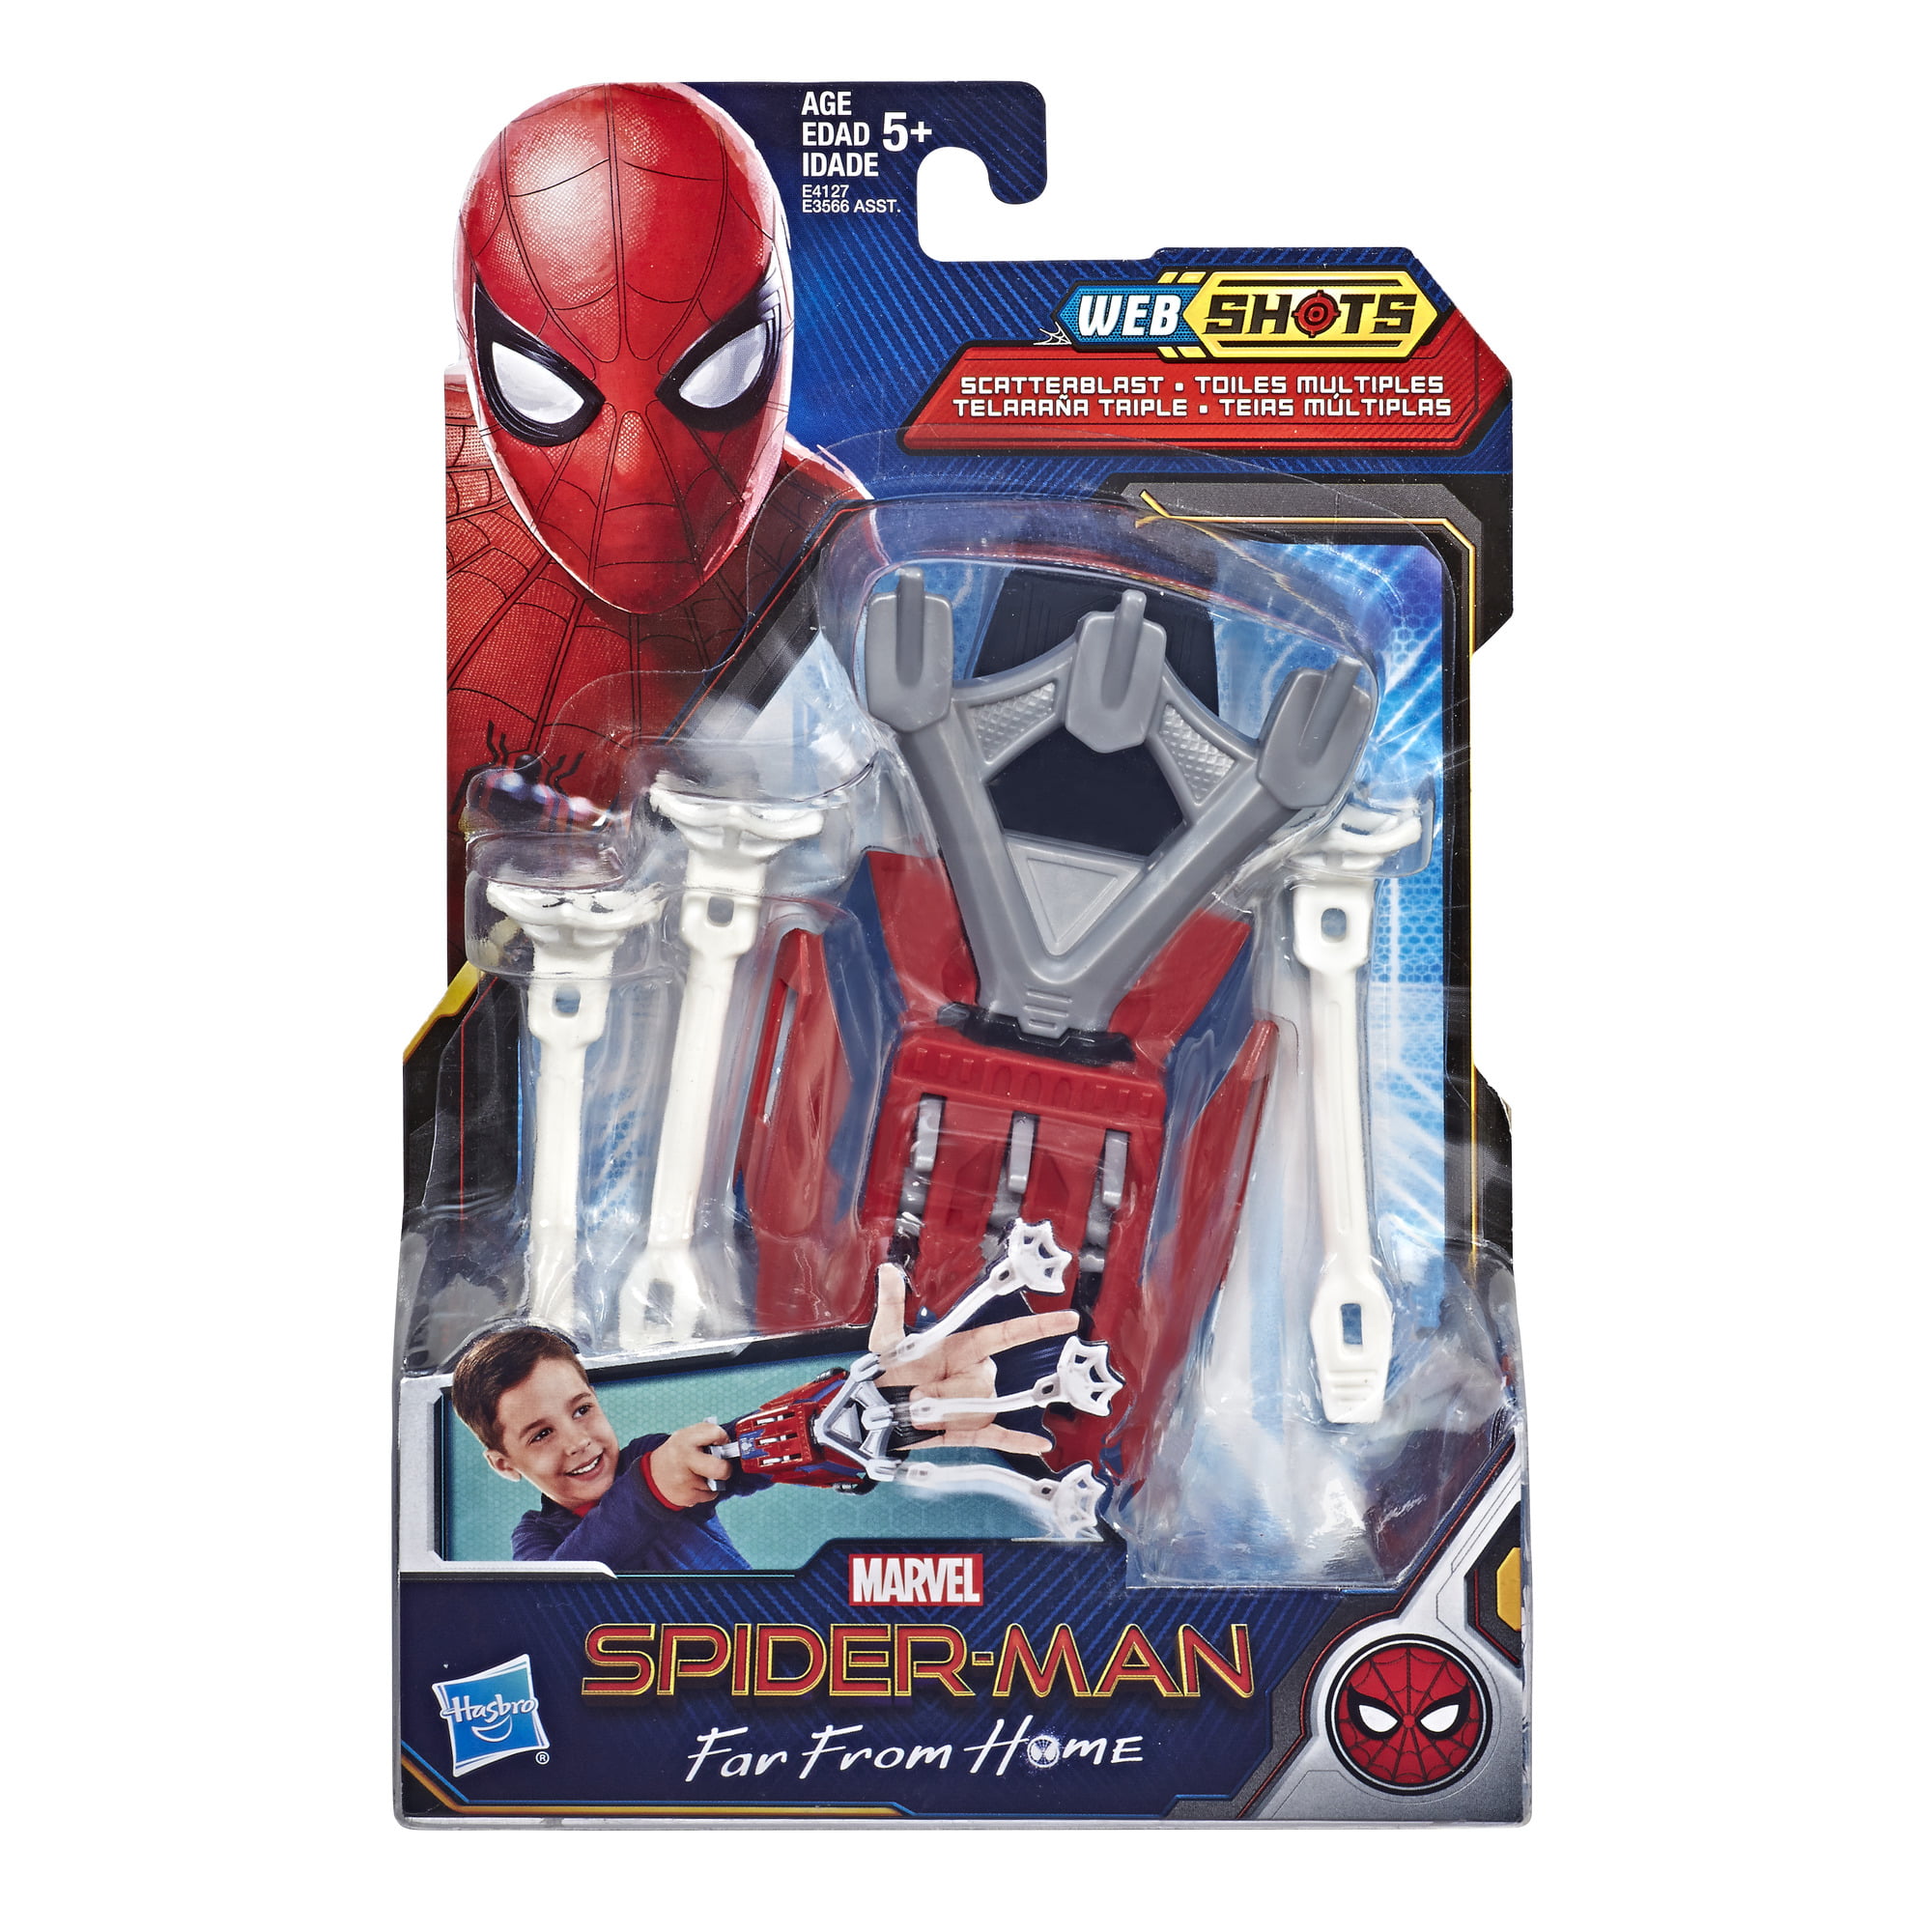 Spider-Man Web Shots Scatterblast Blaster Toy for Kids Ages 5 and Up 